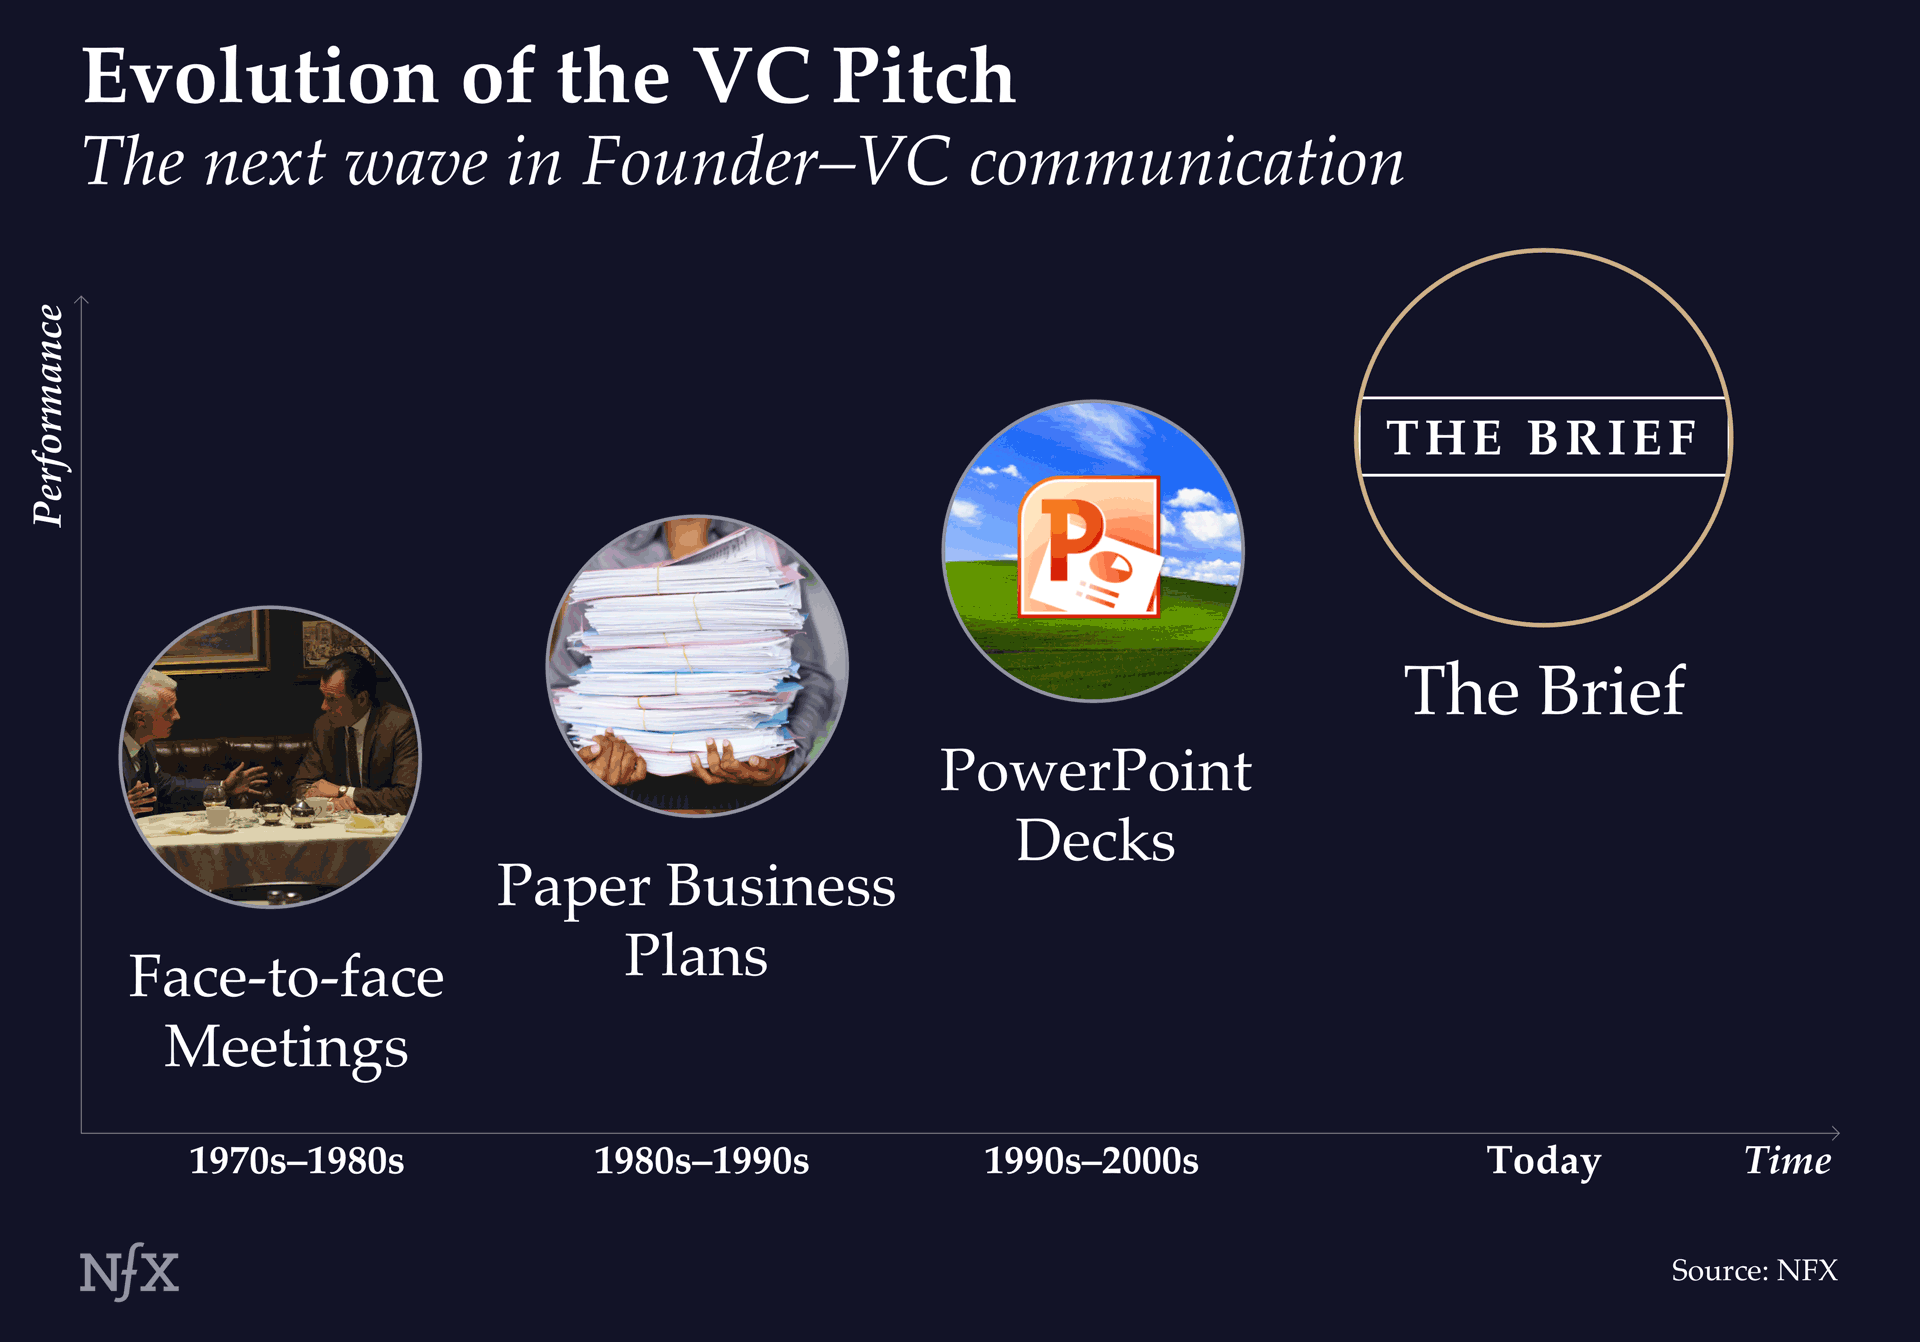 Evolution of the VC Pitch Timeline Image